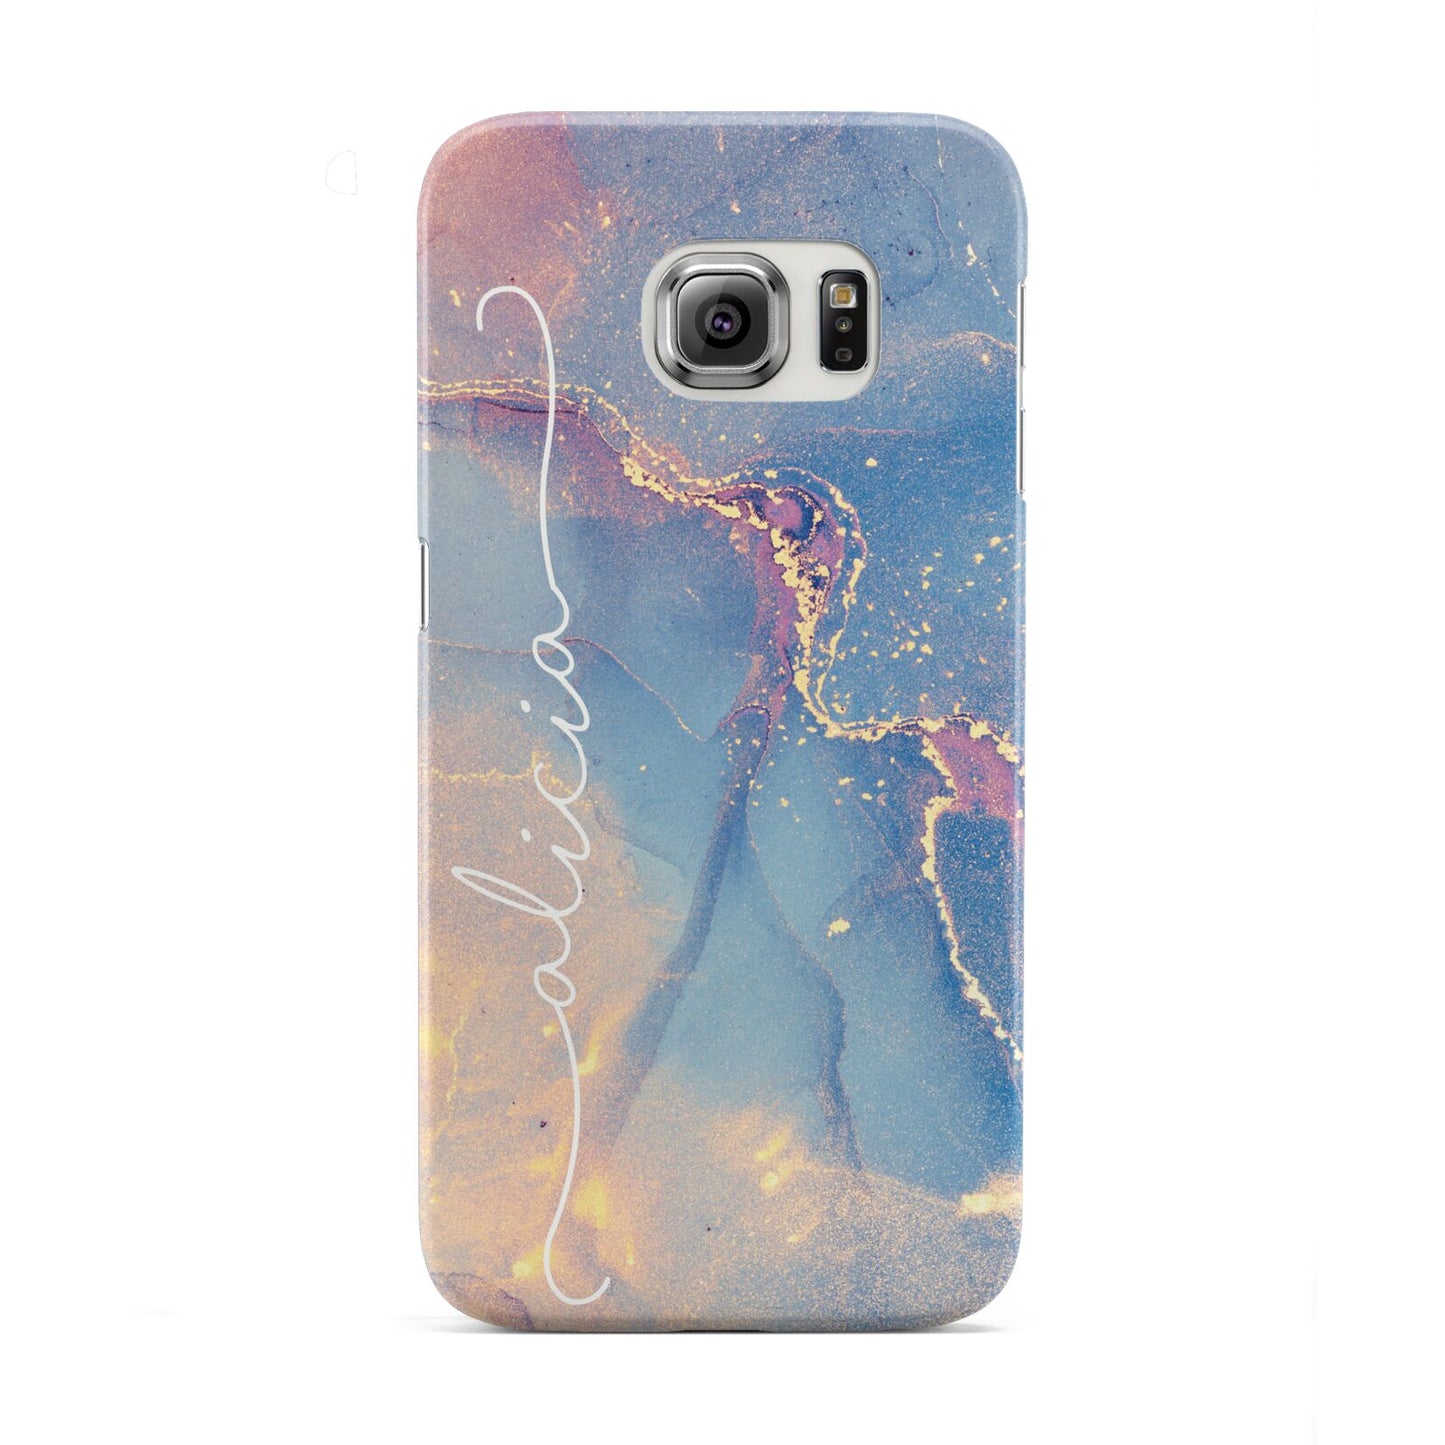 Blue and Pink Marble Samsung Galaxy S6 Edge Case